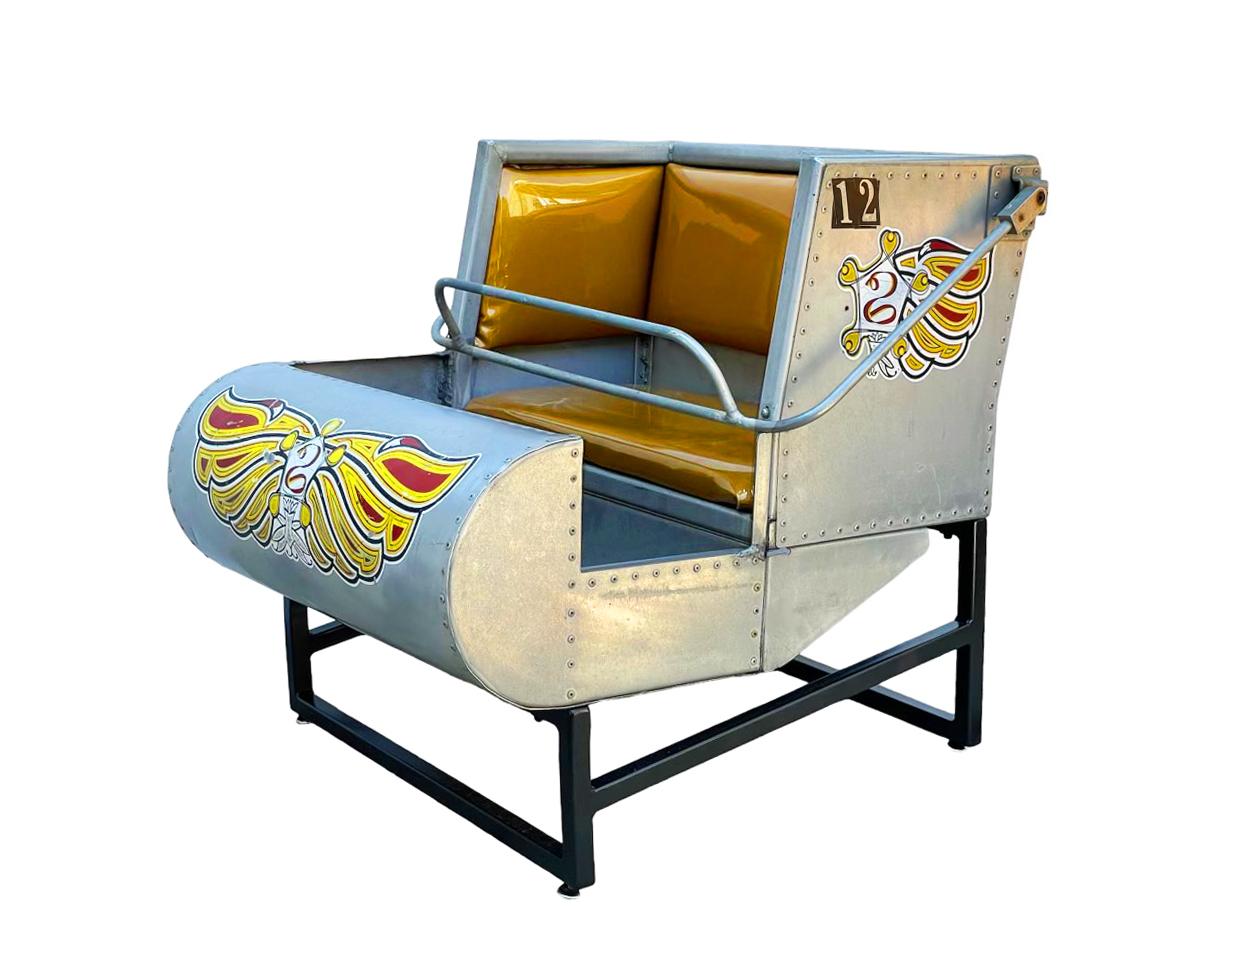 An upcycled work of art. This retired amusement park ride seat has been converted into a usable chair. This is from a kids size ride so it's smaller scale. It will definitely be the conversation in any room. One of a kind, so don't miss out. 